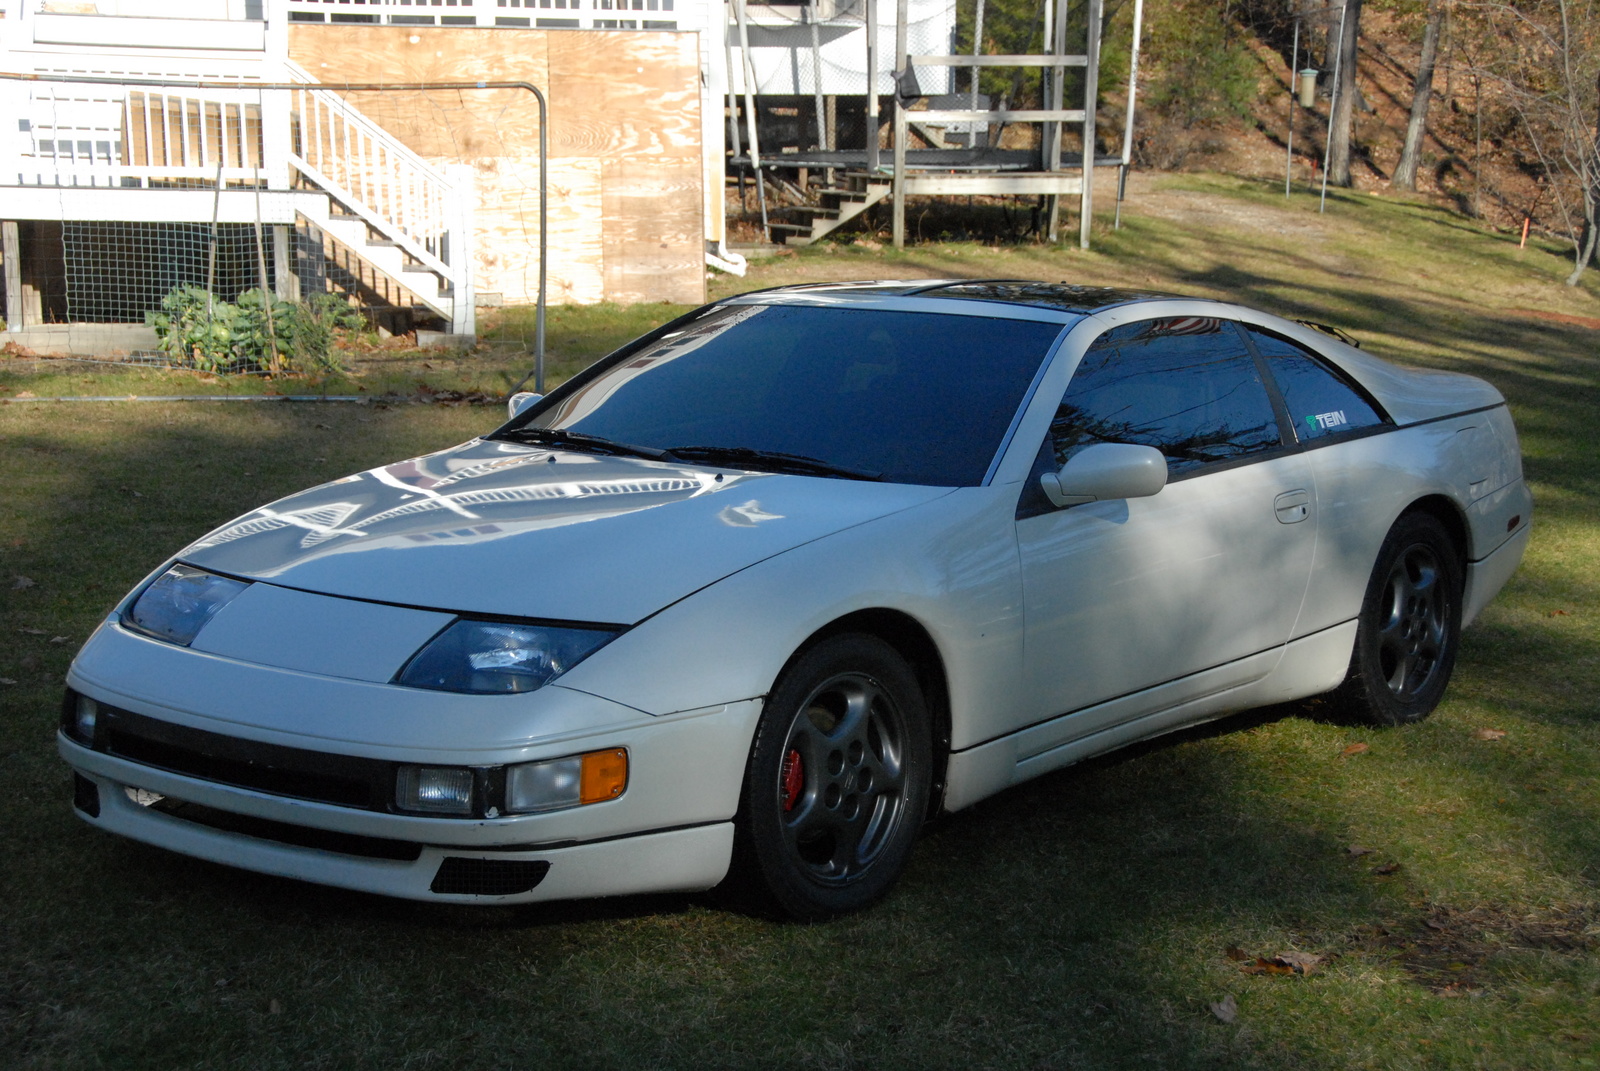 Picture of a 1990 nissan 300zx #5